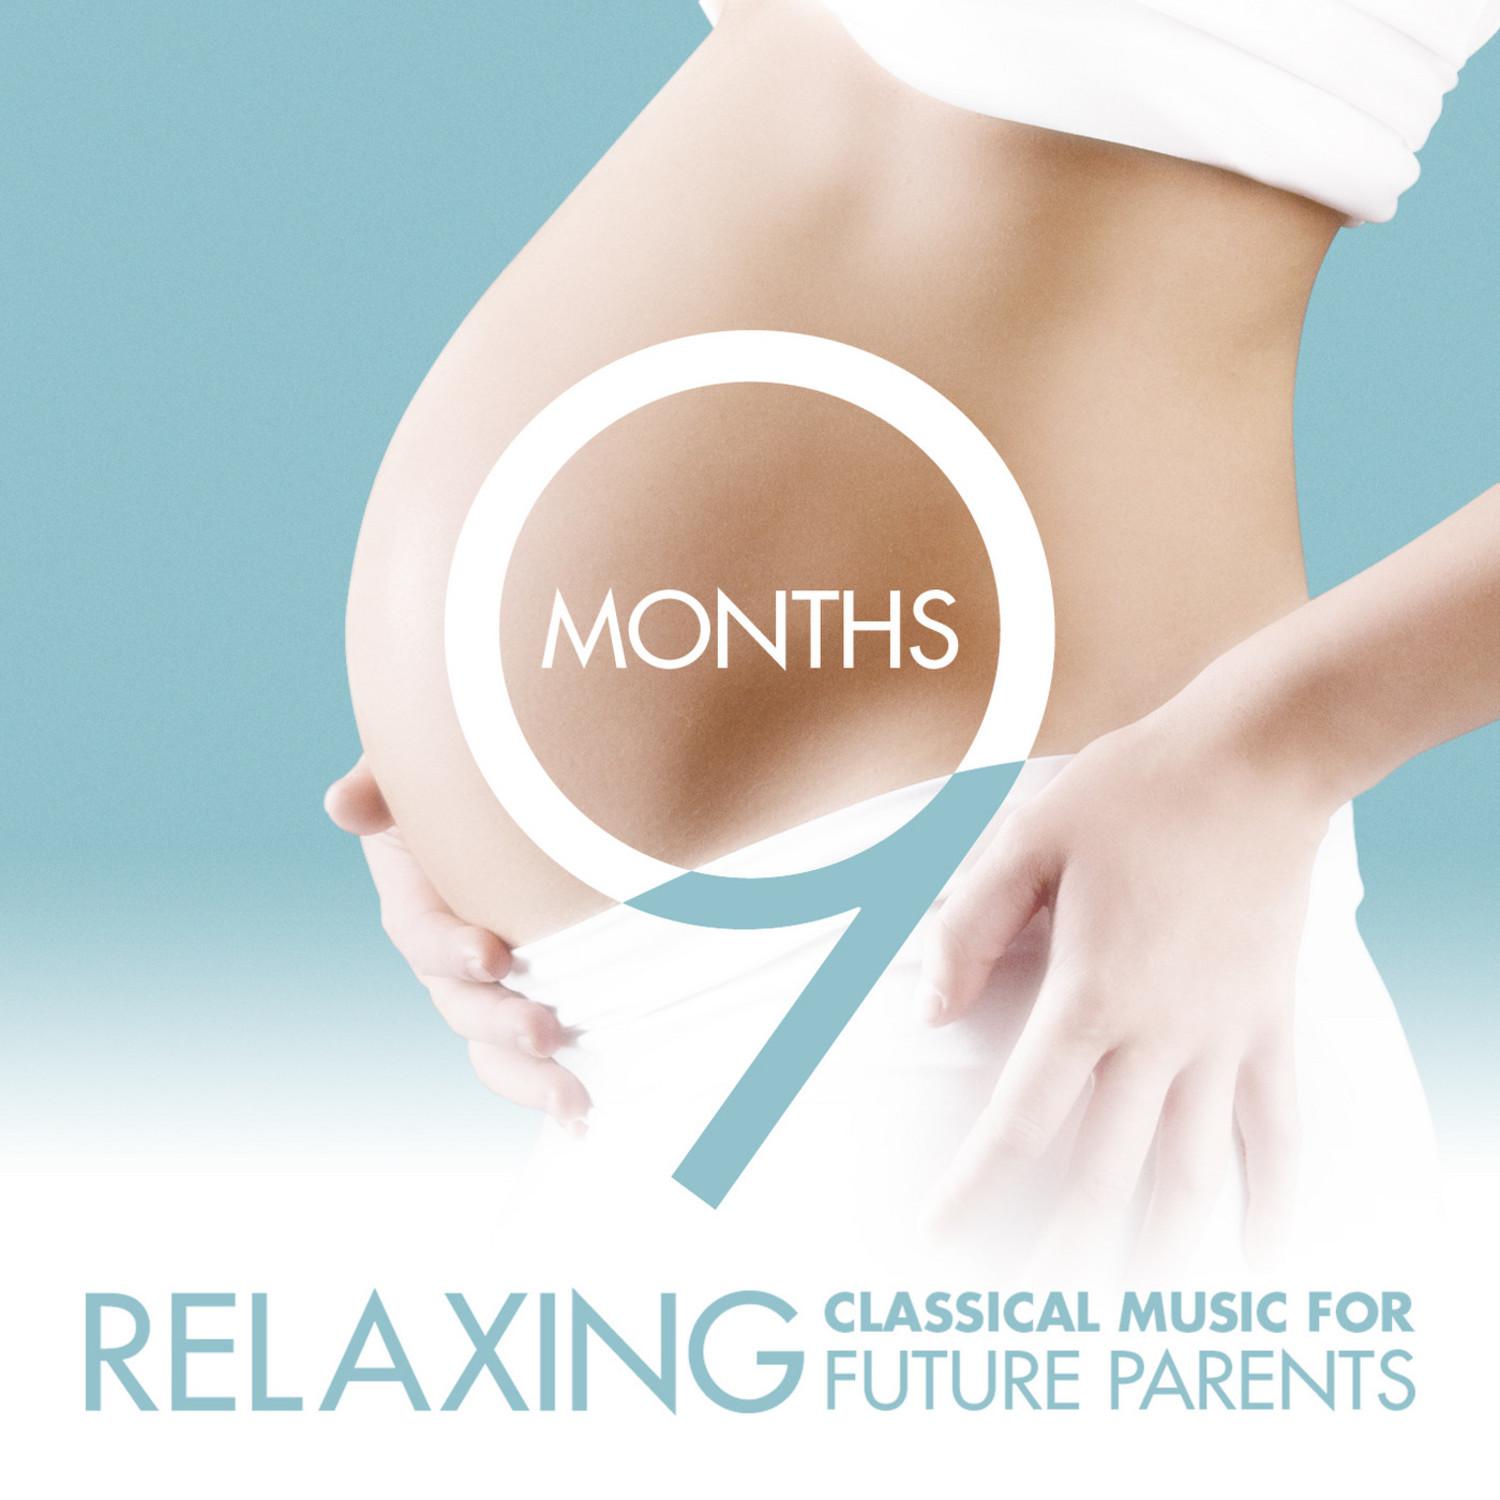 9 Months - Relaxing Classical Music for Future Parents